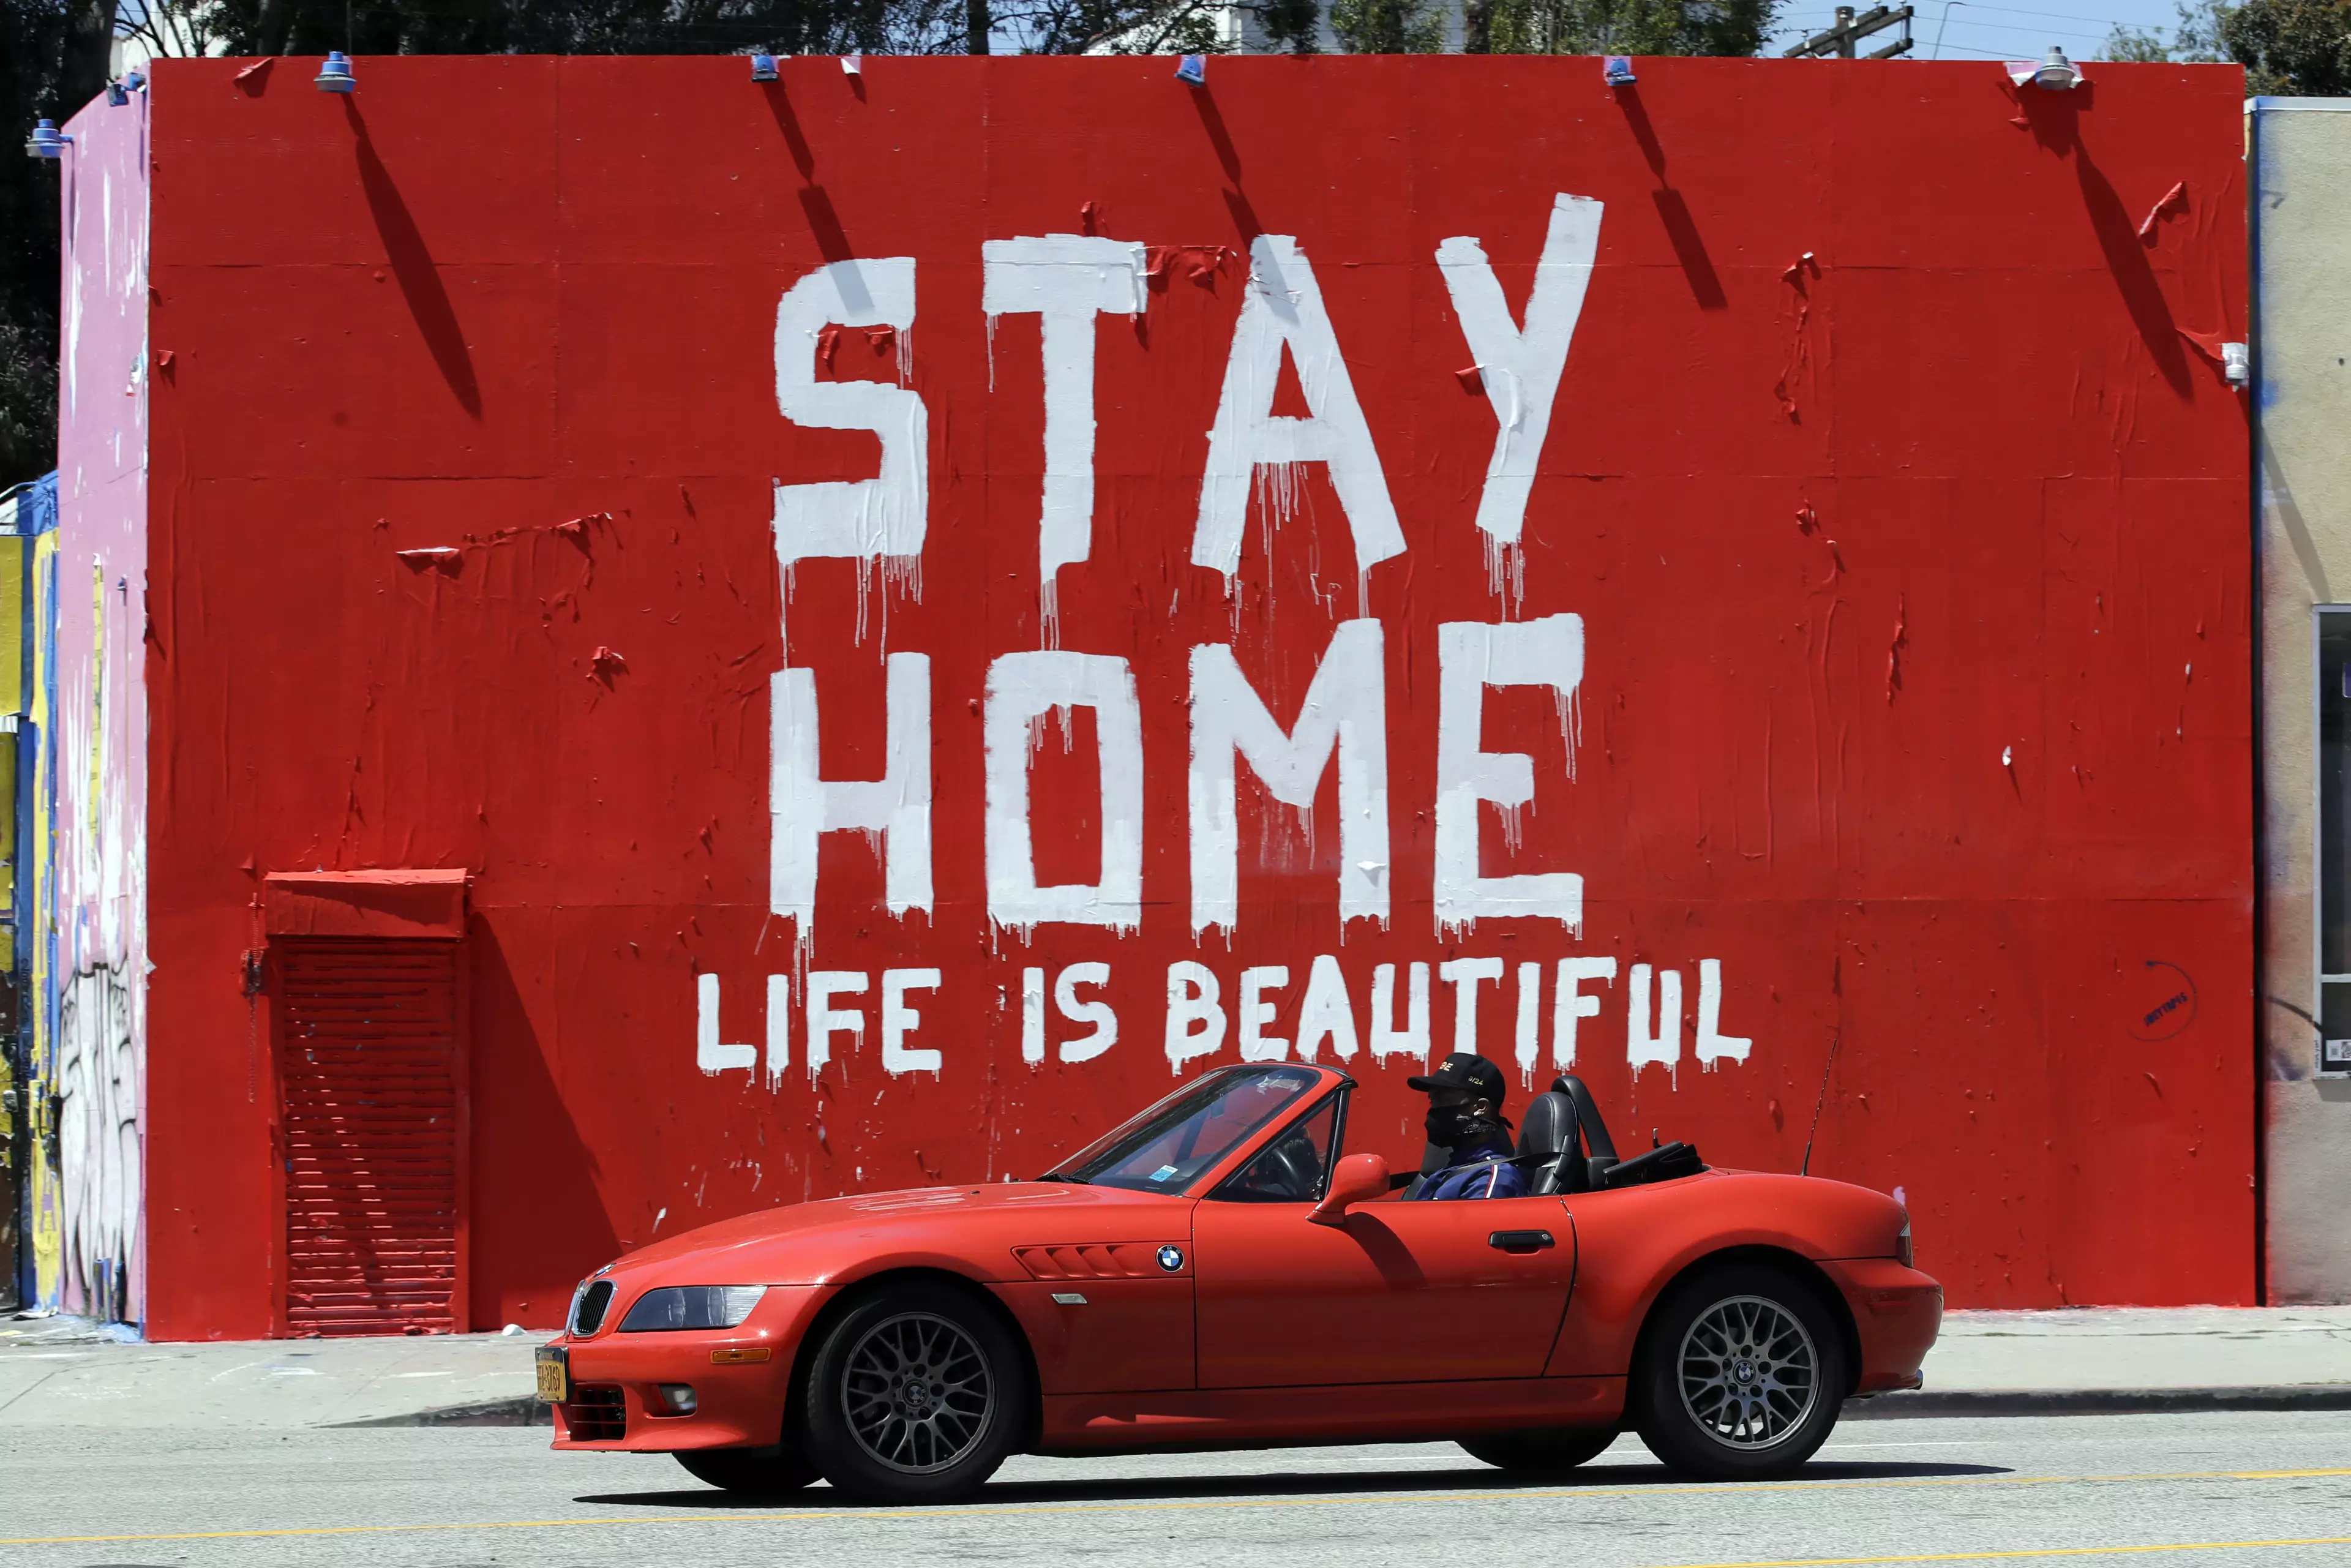 A mural in Los Angeles imploring people to stay at home.